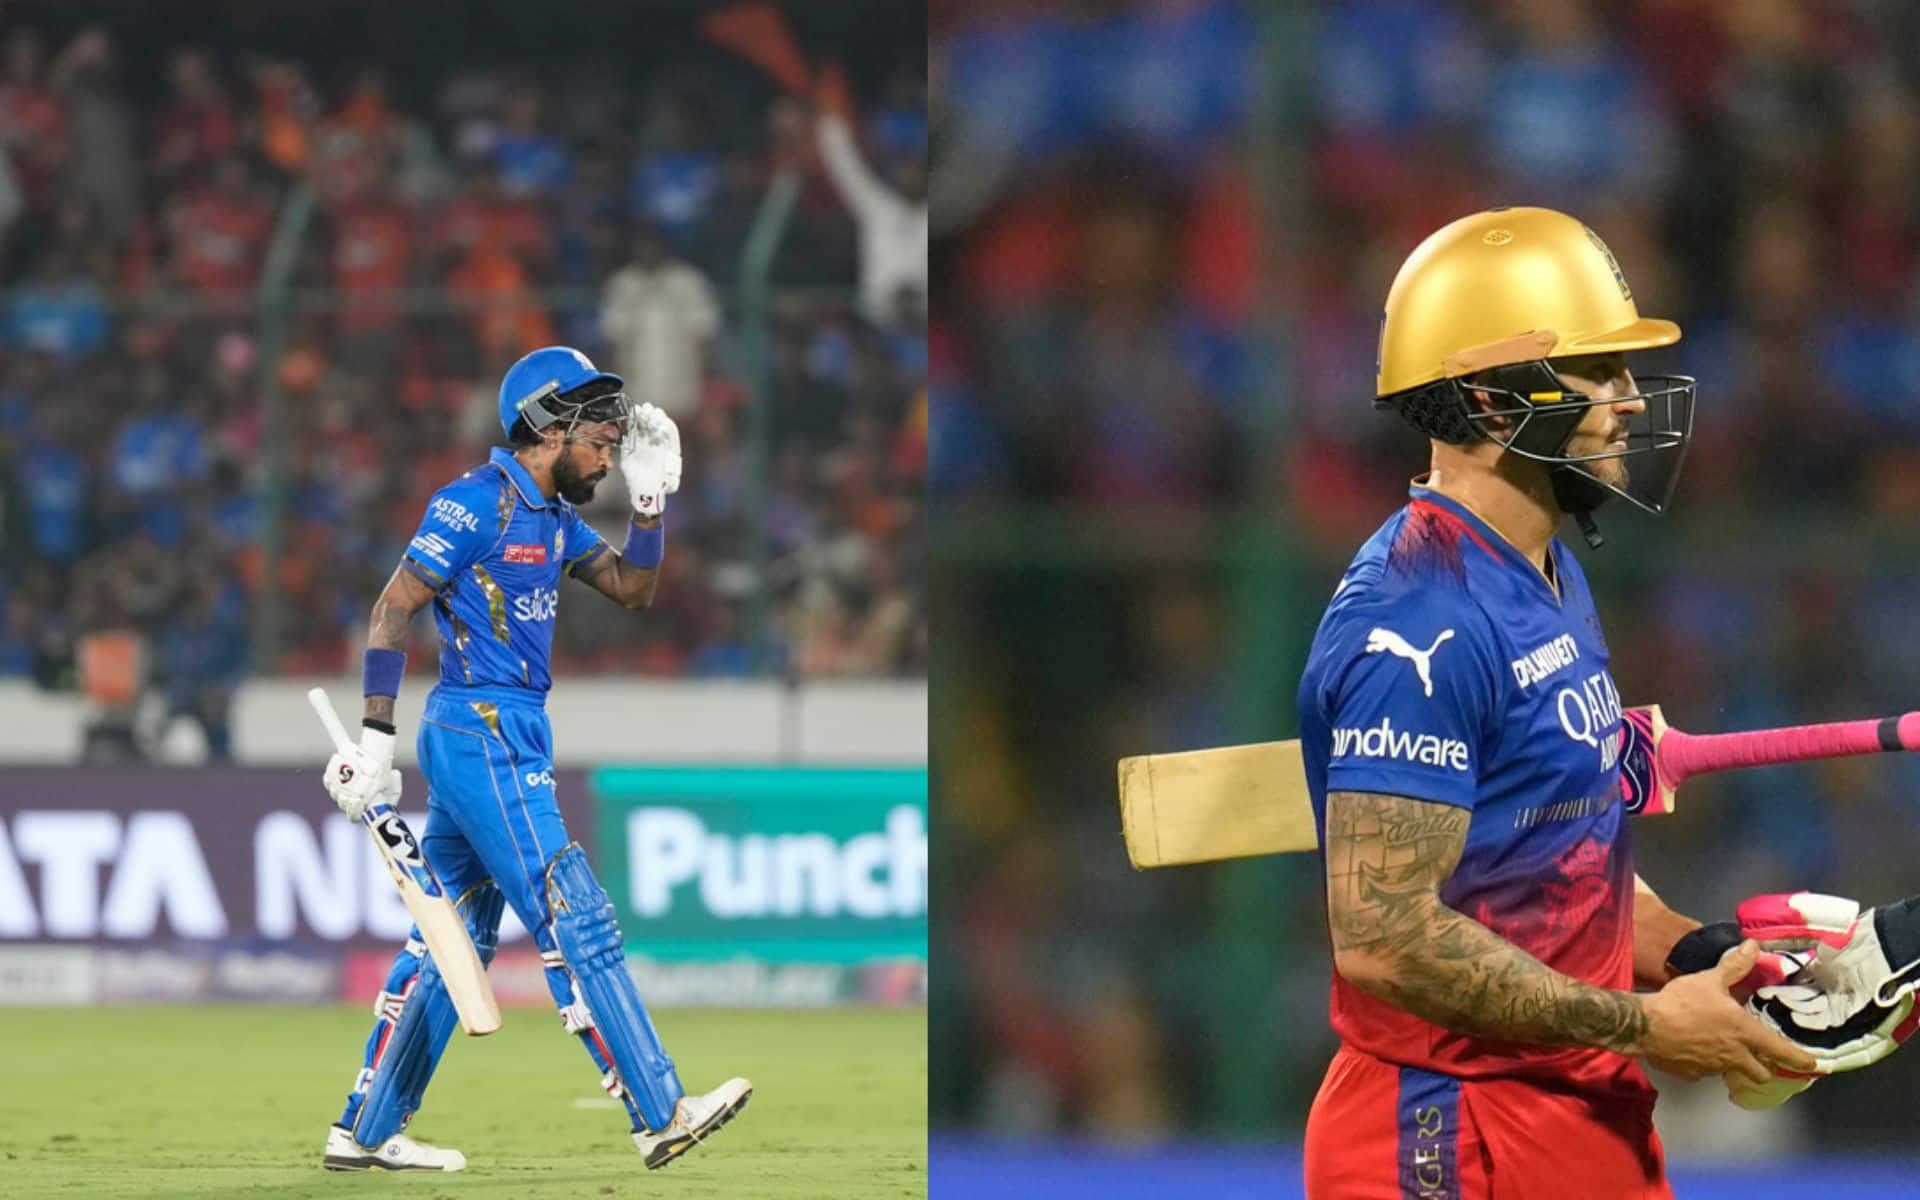 Faf du Plessis vs Hardik Pandya - Who Has Been The Bigger Disappointment As A Captain?